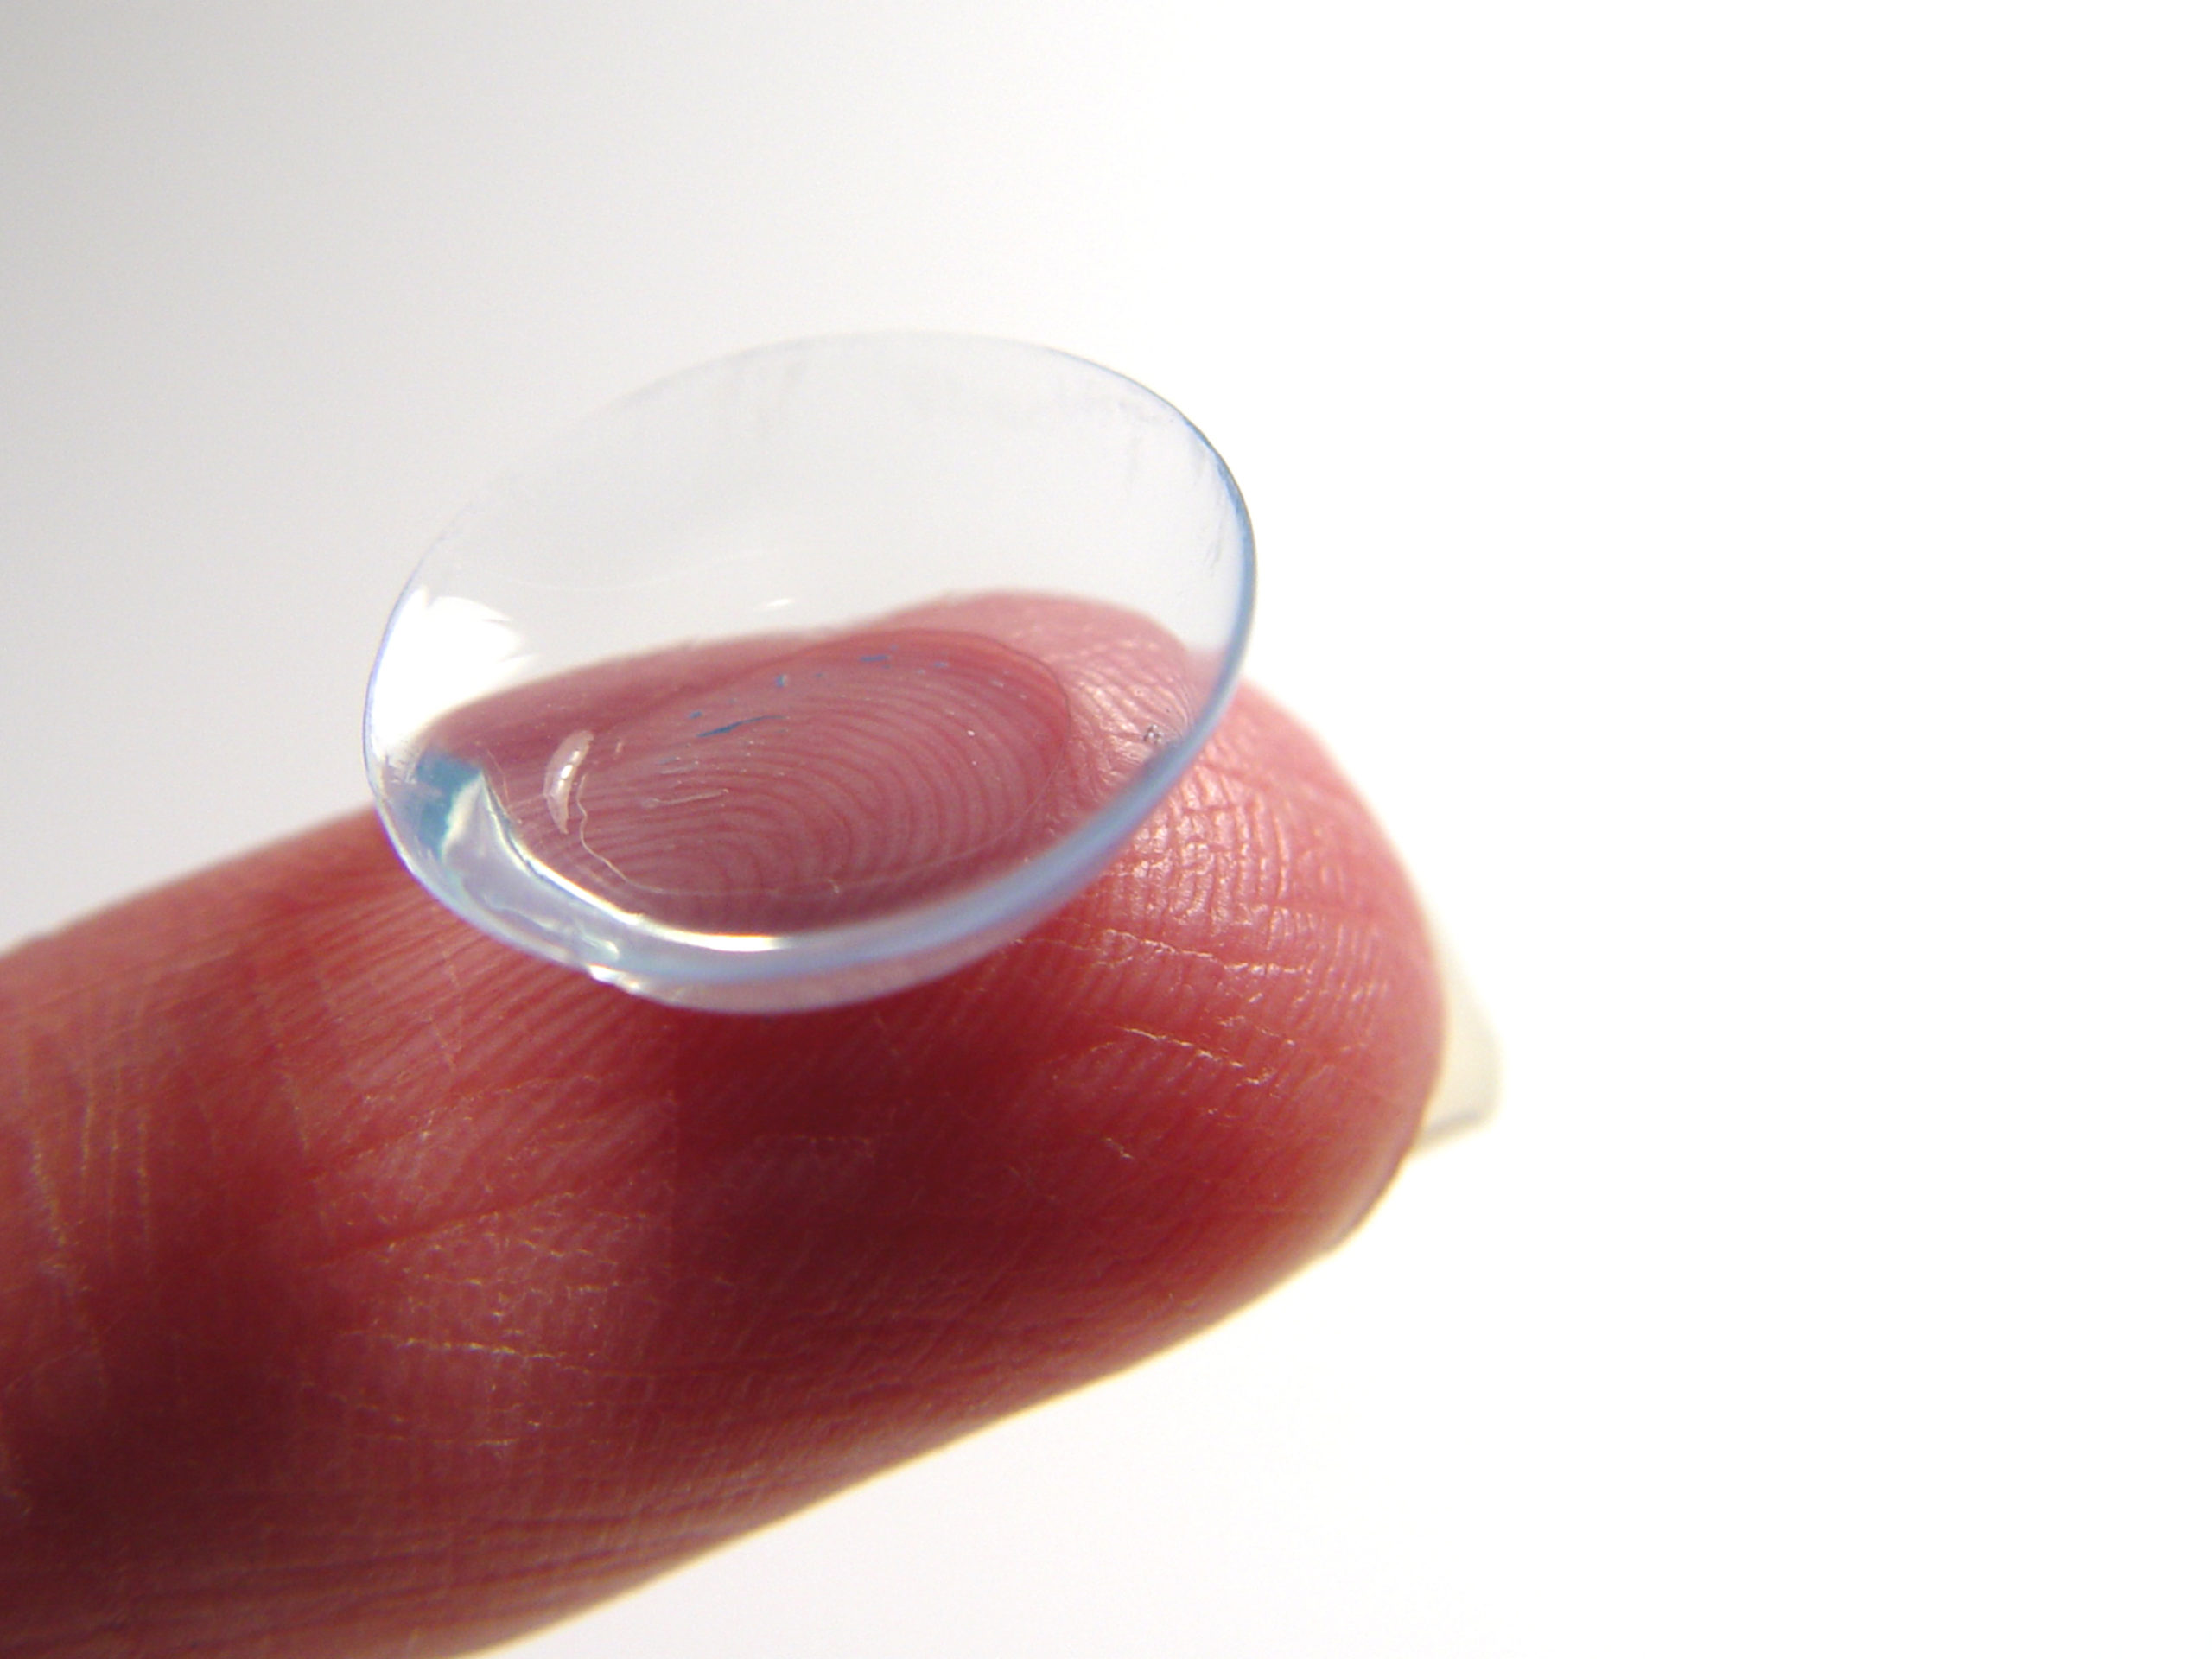 finger tip holding contact lens